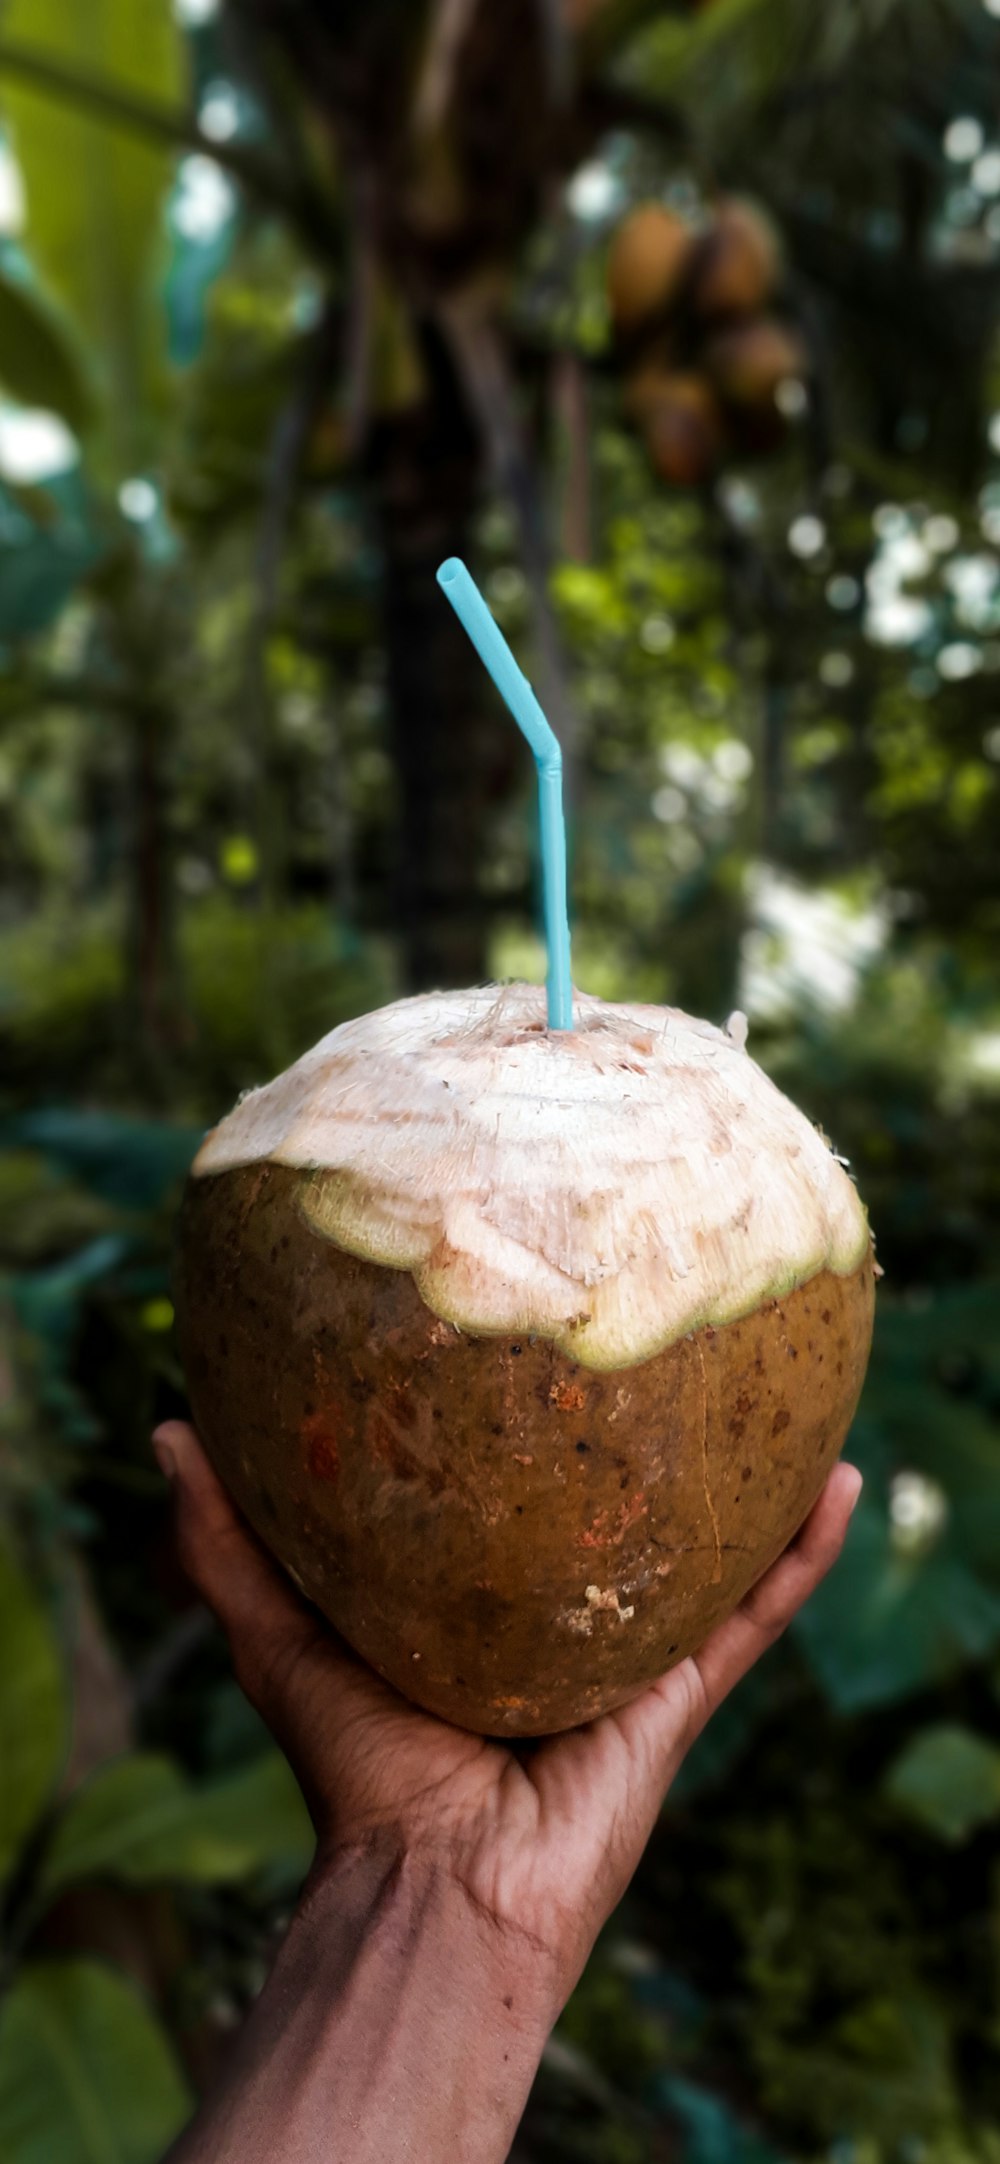 person holding coconut fruit with blue straw